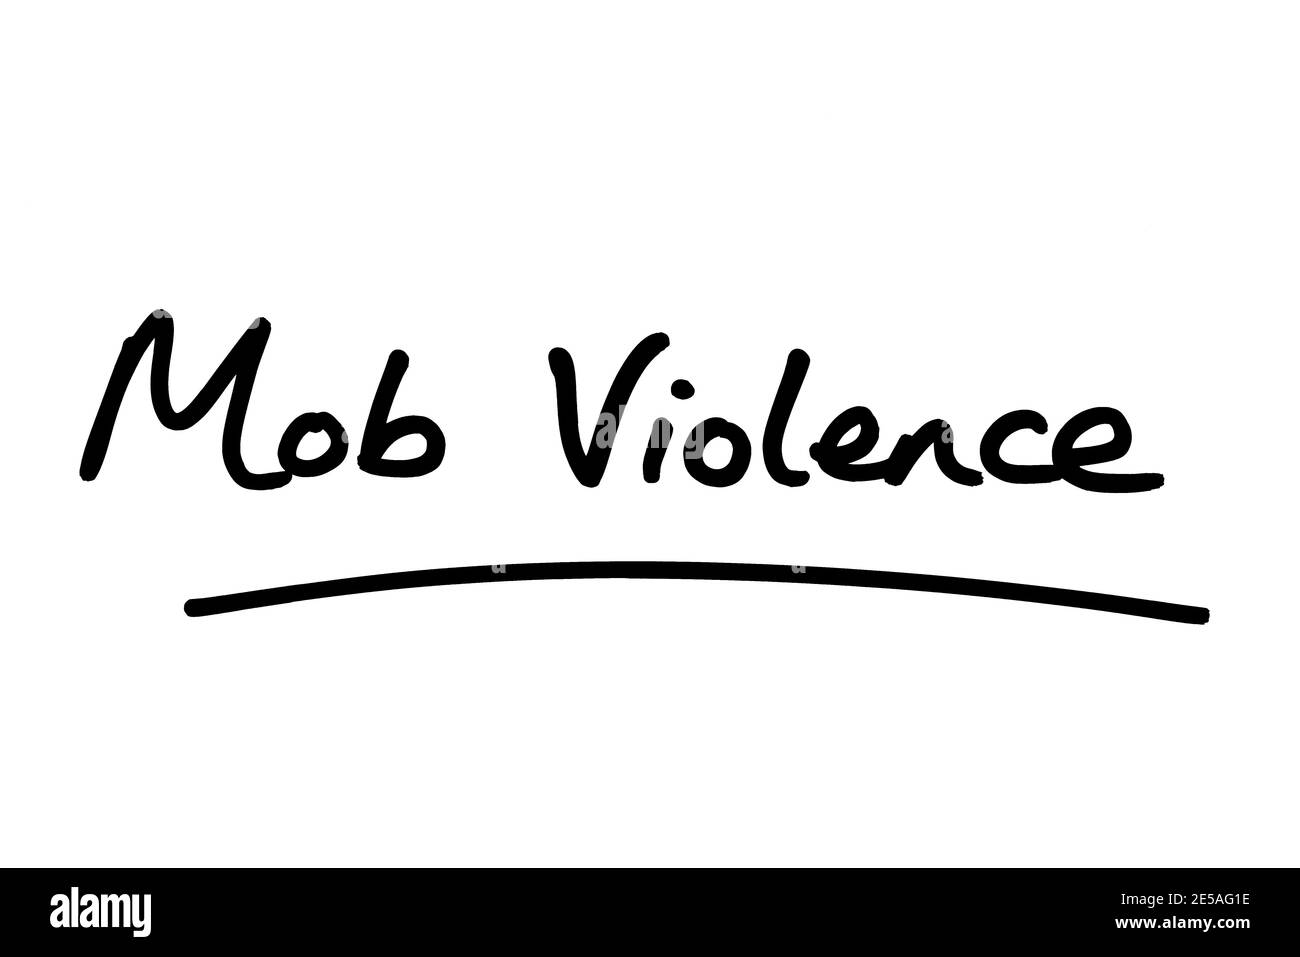 Mob Violence, handwritten on a white background. Stock Photo